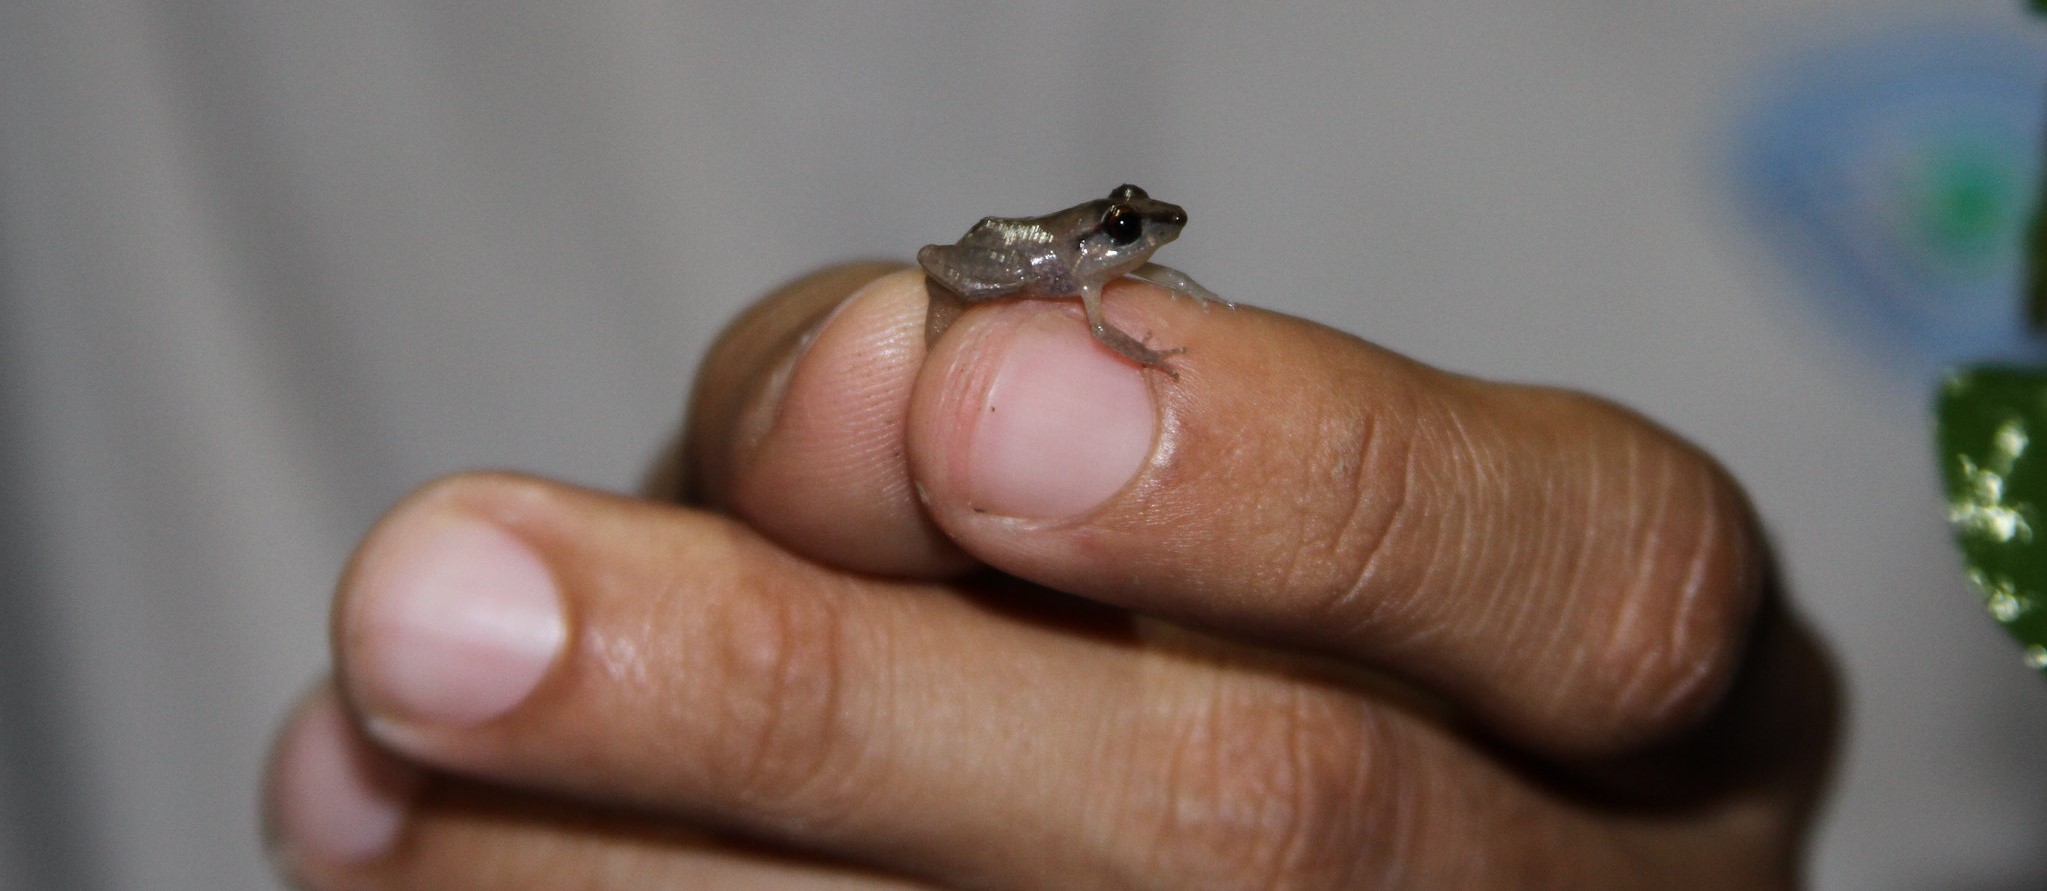 A coquí frog sitting on top of a person's index and thumb fingers